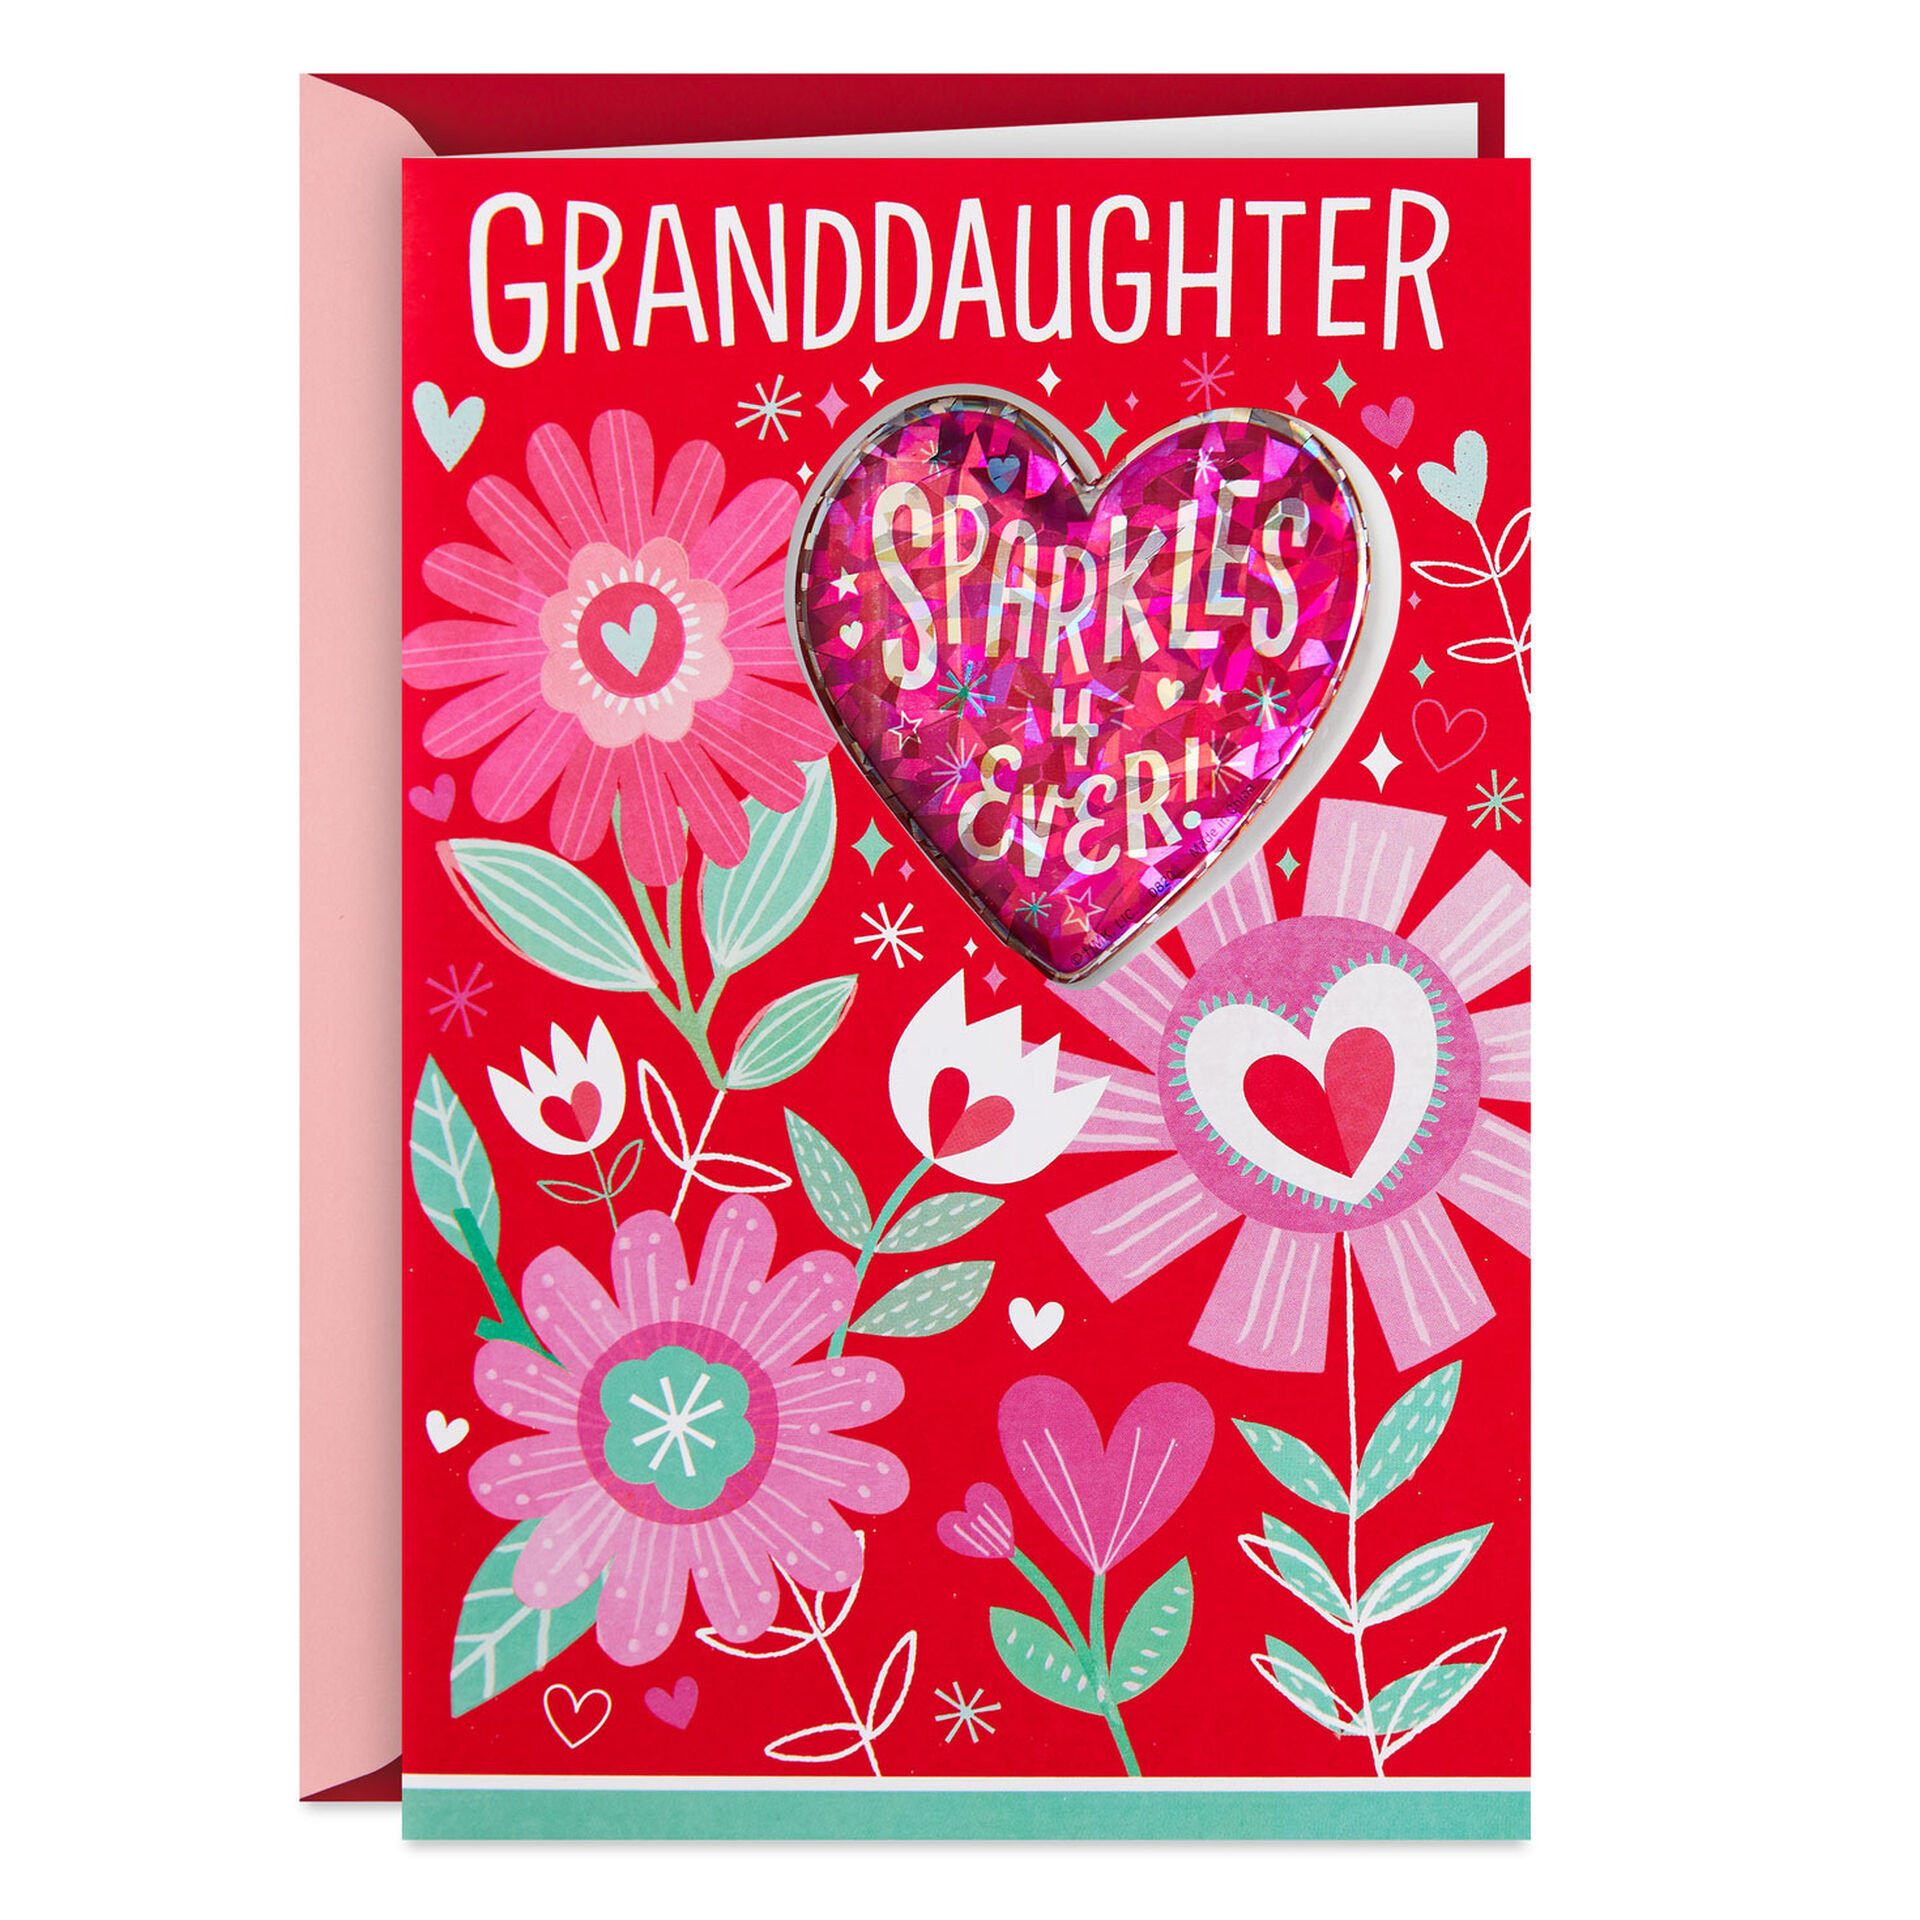 sparkles-forever-granddaughter-valentine-s-day-card-with-sticker